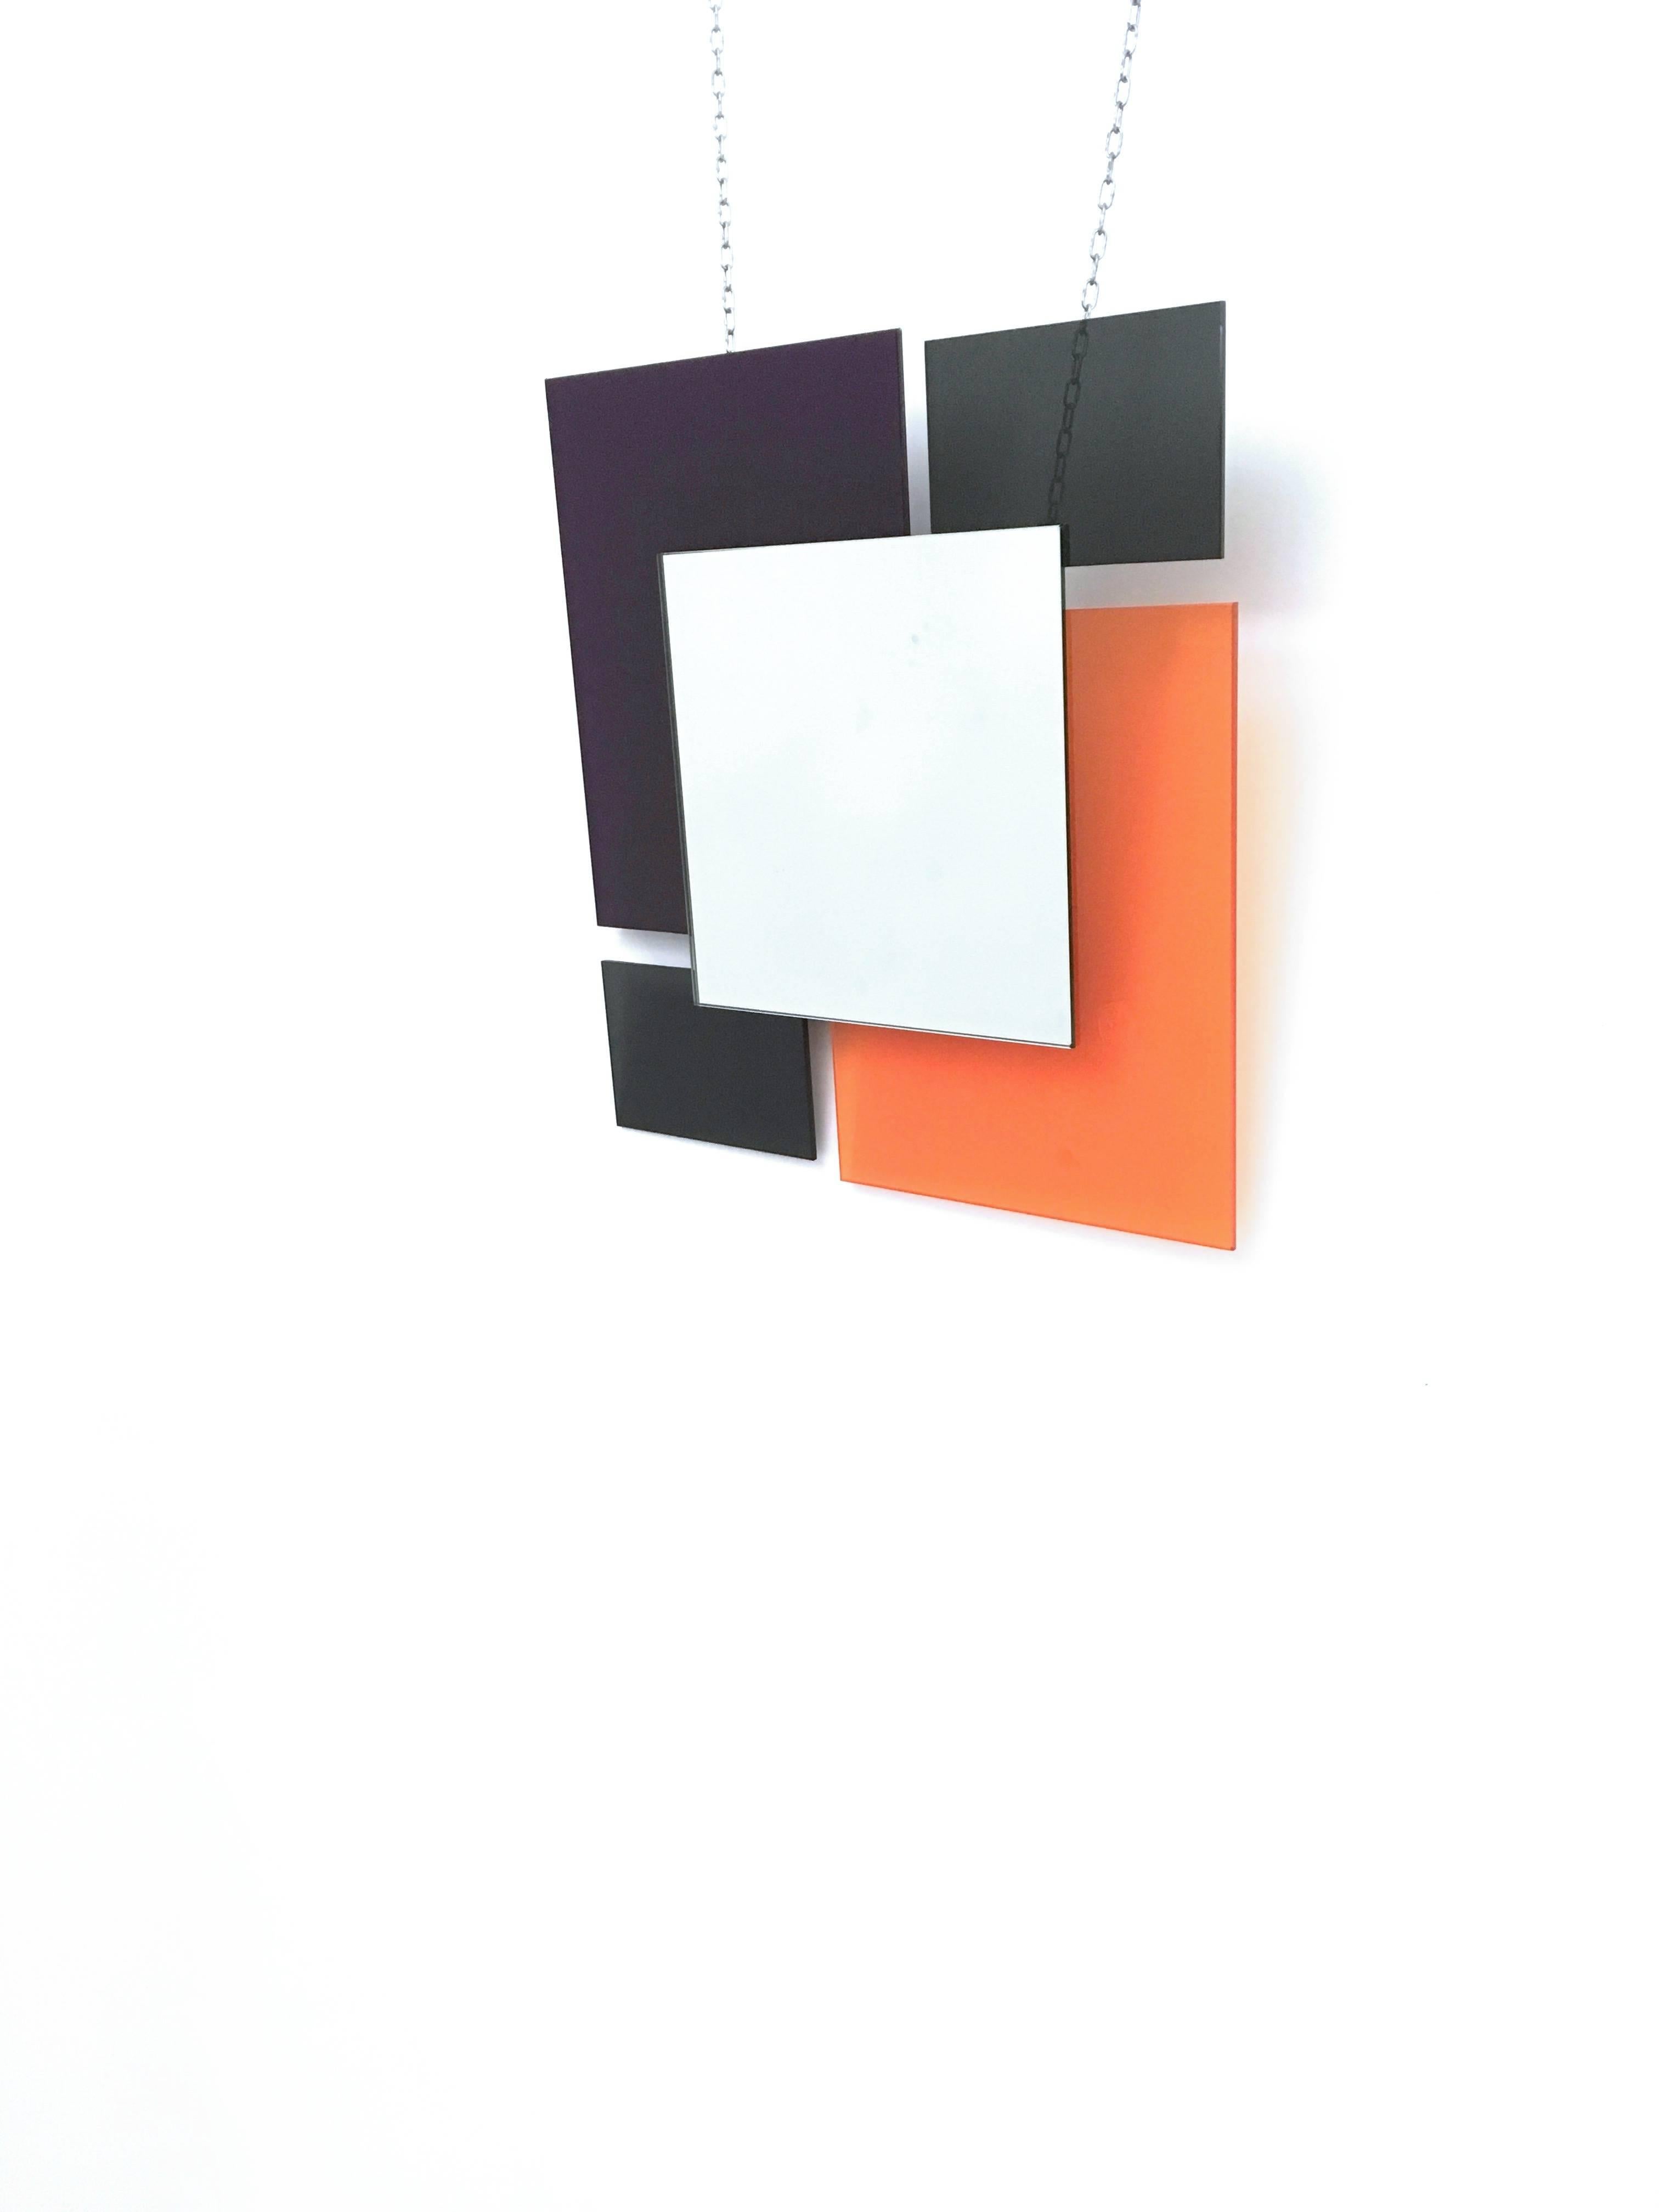 Late 20th Century Pair of Postmodern Black and Orange Wall Mirrors in the Style of Sottsass, 1980s For Sale